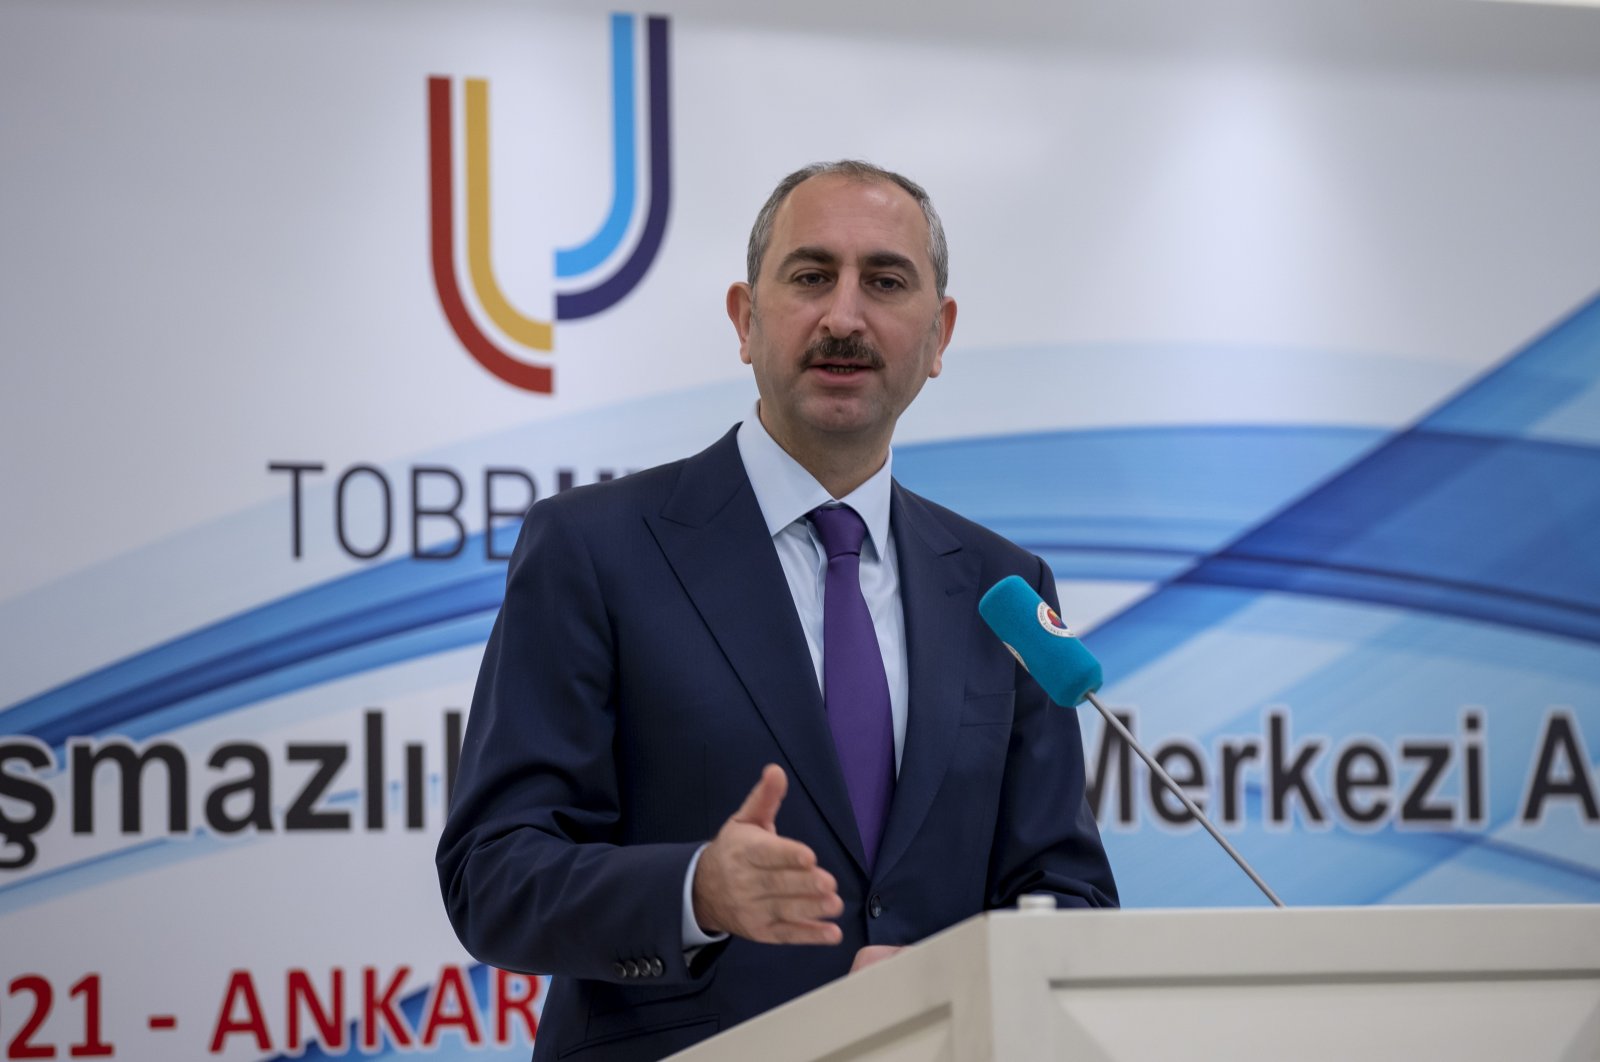 Justice Minister Abdulhamit Gül speaks at an event organized by the Union of Chambers and Commodity Exchanges of Turkey (TOBB) in the capital Ankara, March 11, 2021. (AA Photo)